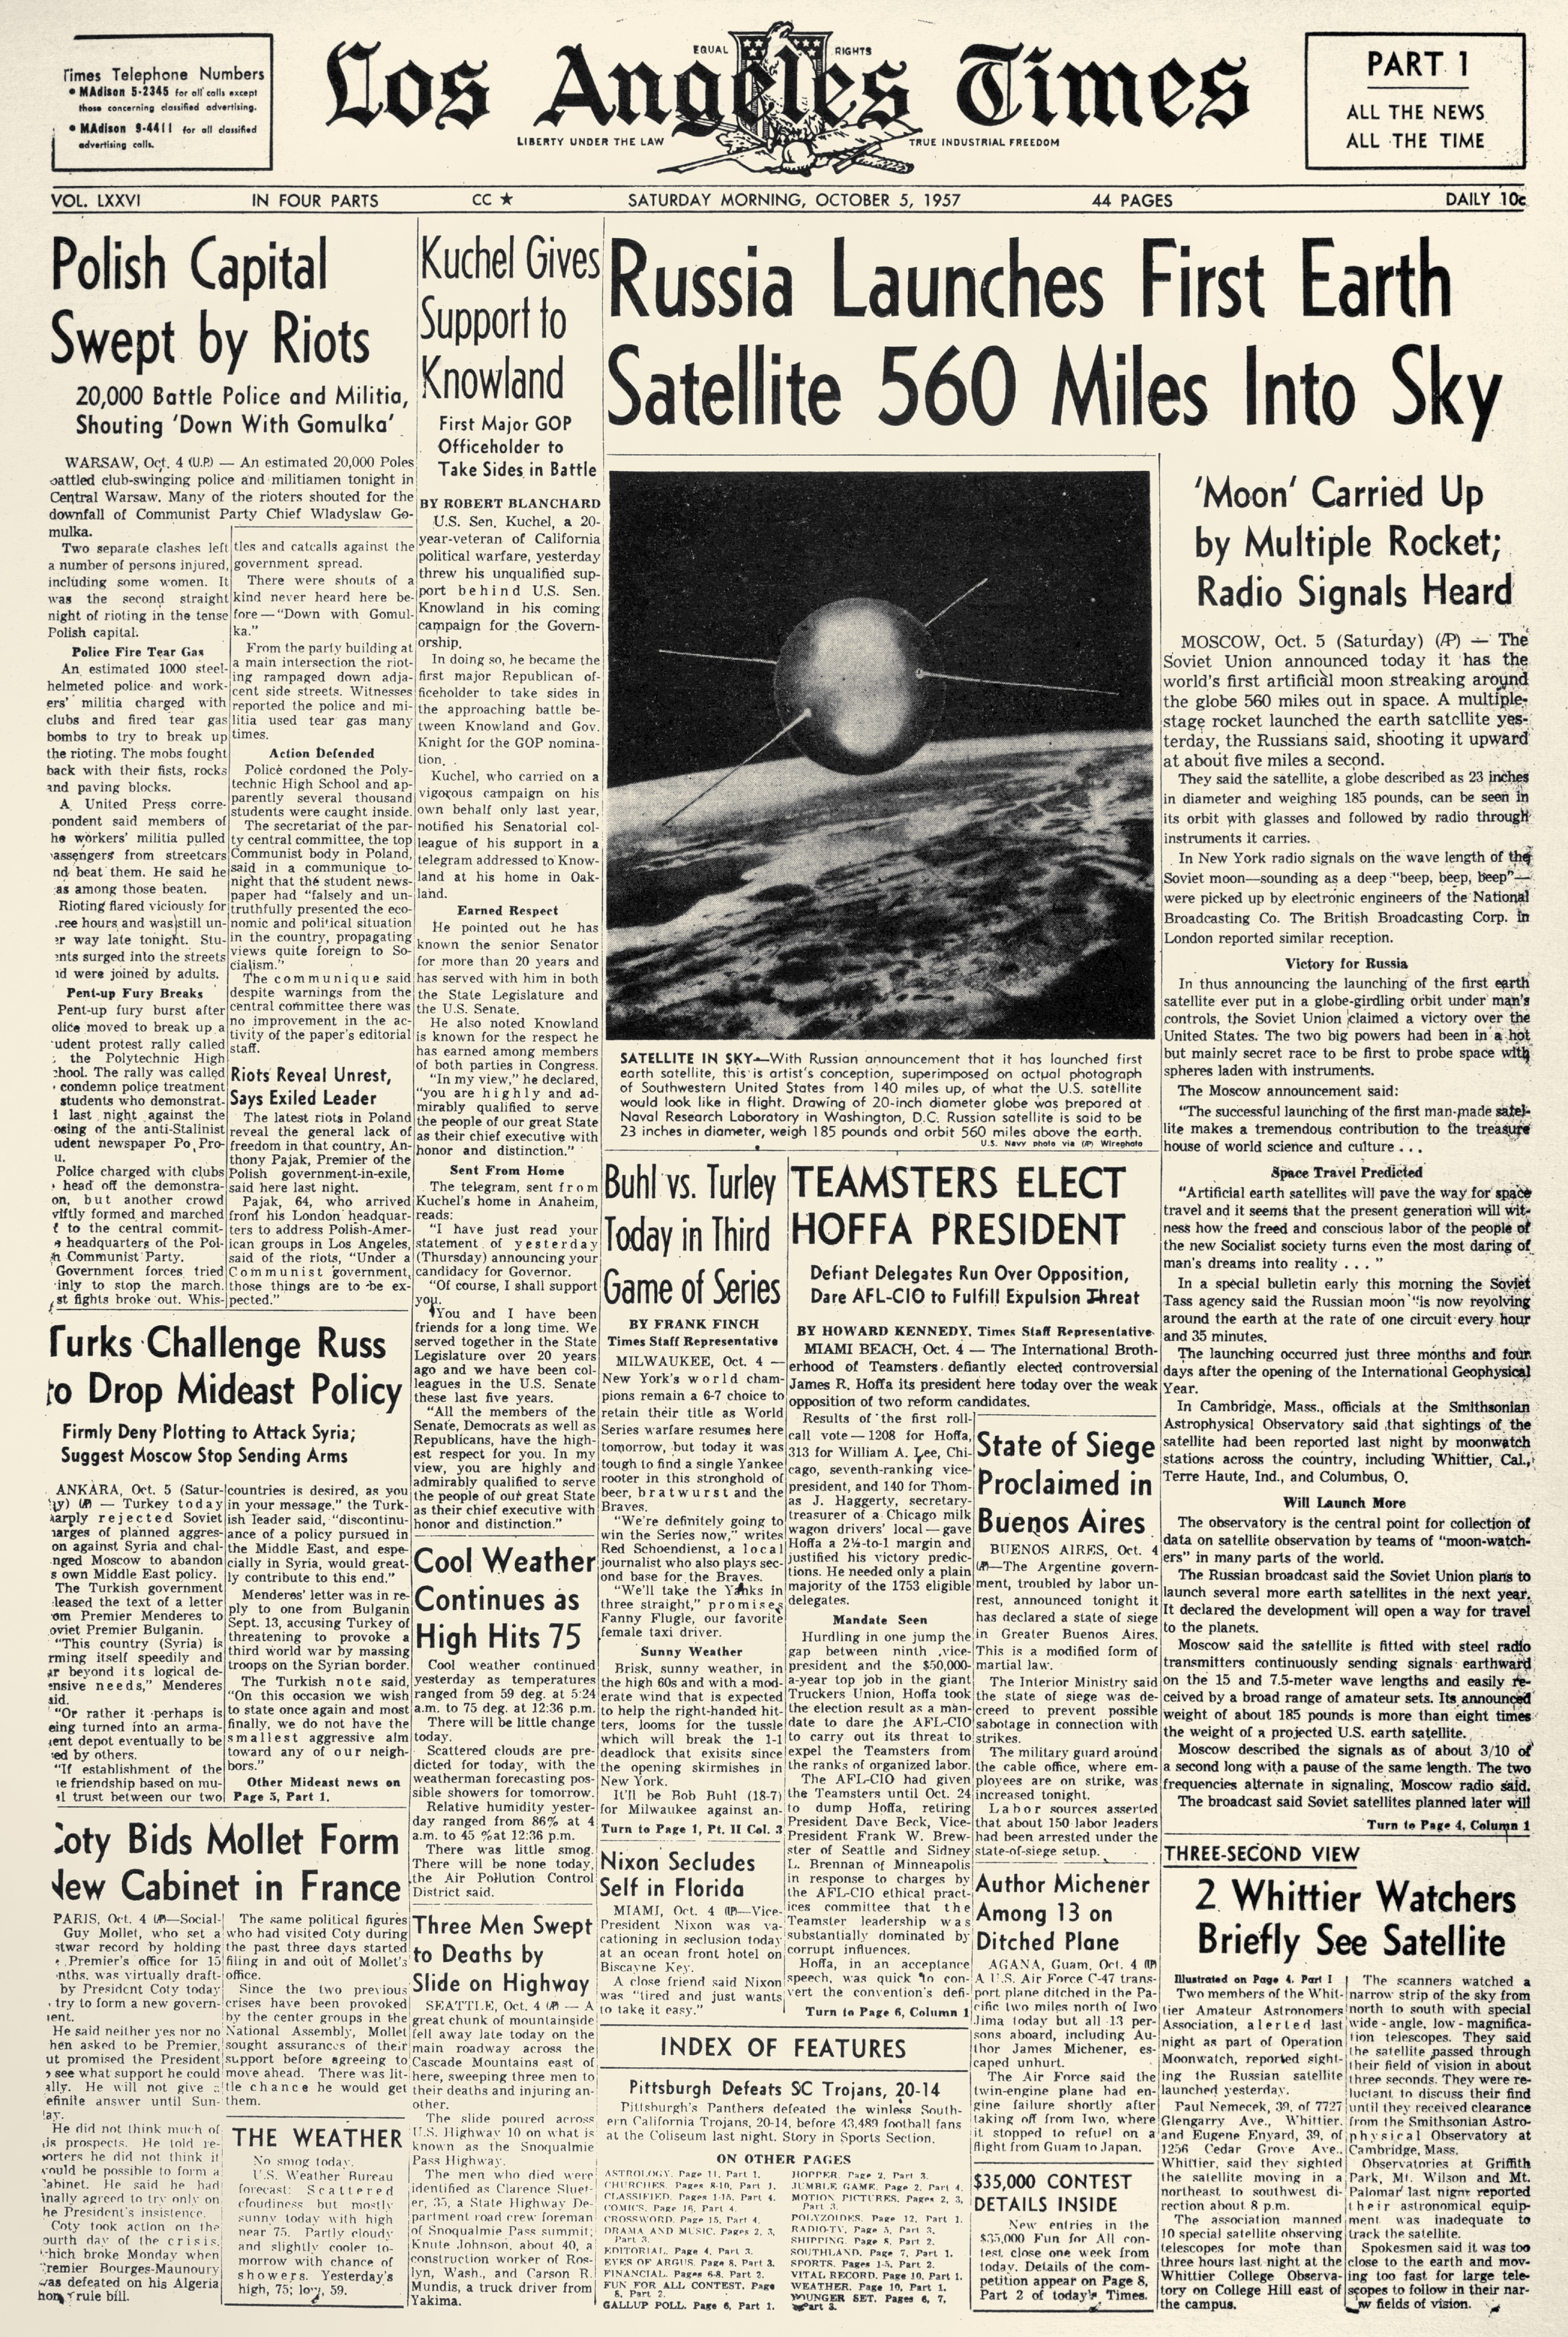 Los Angeles Times Front Page, October 5, 1957